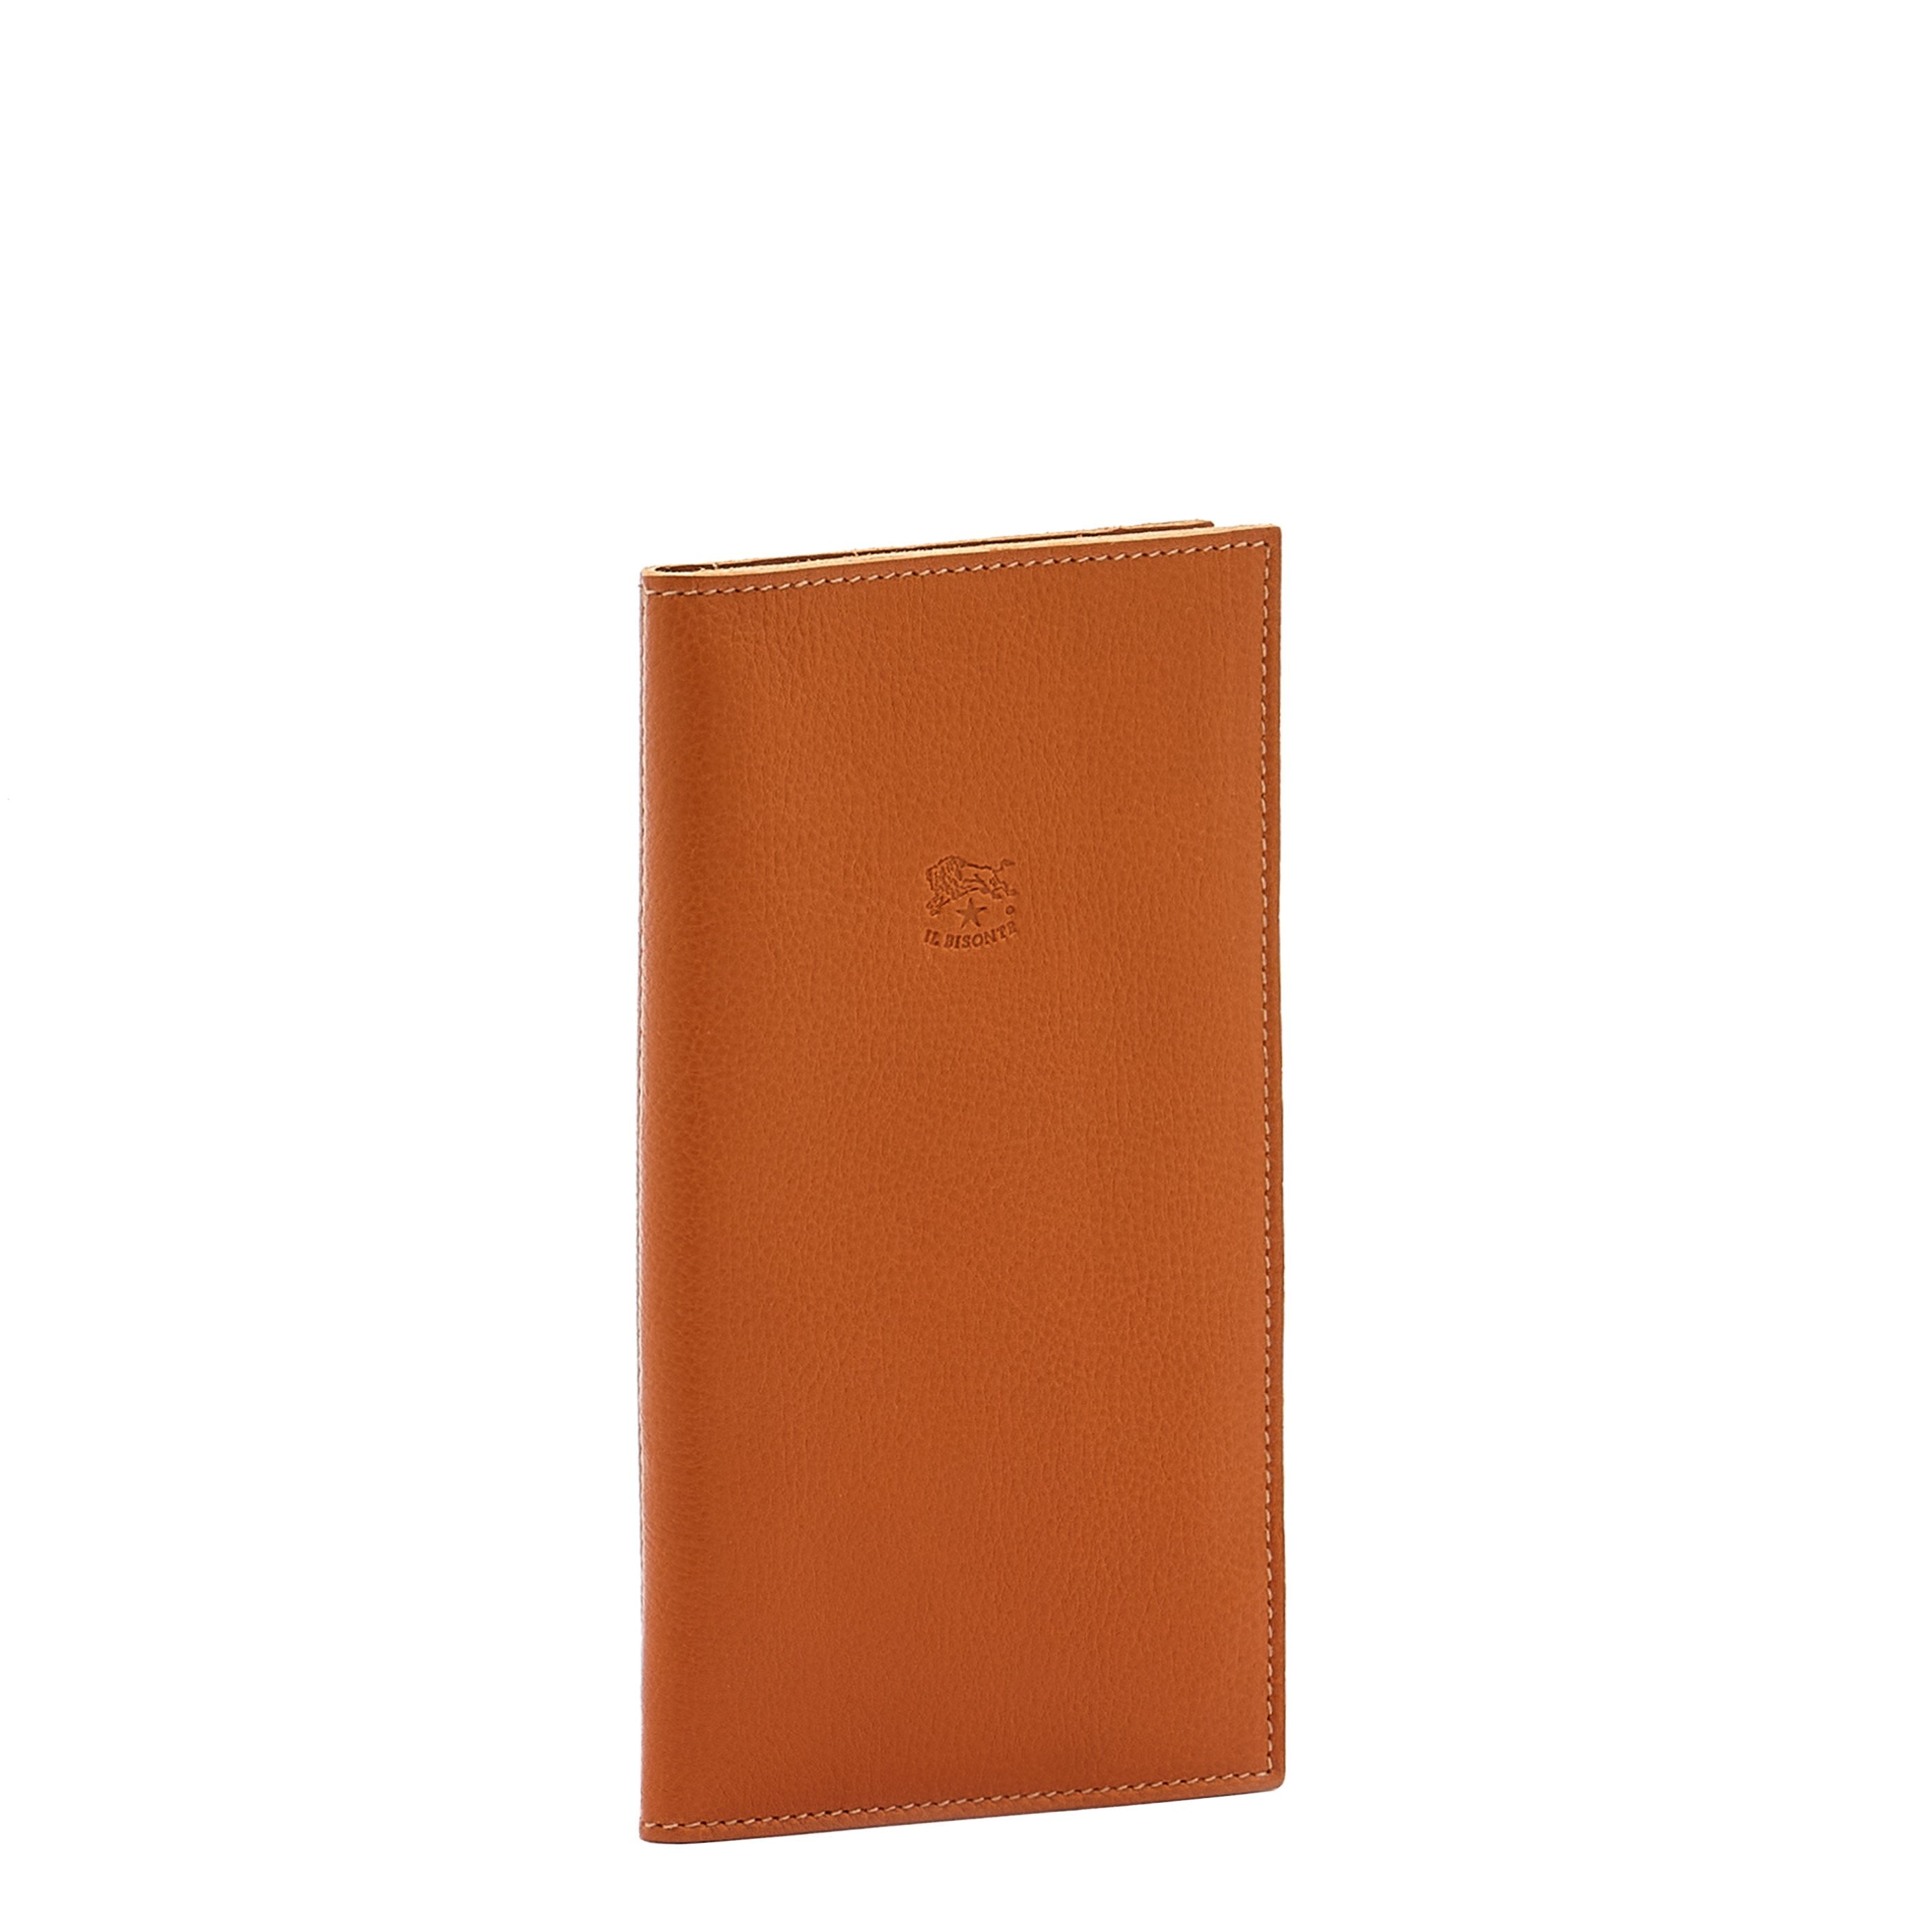 Wallet in calf leather color caramel